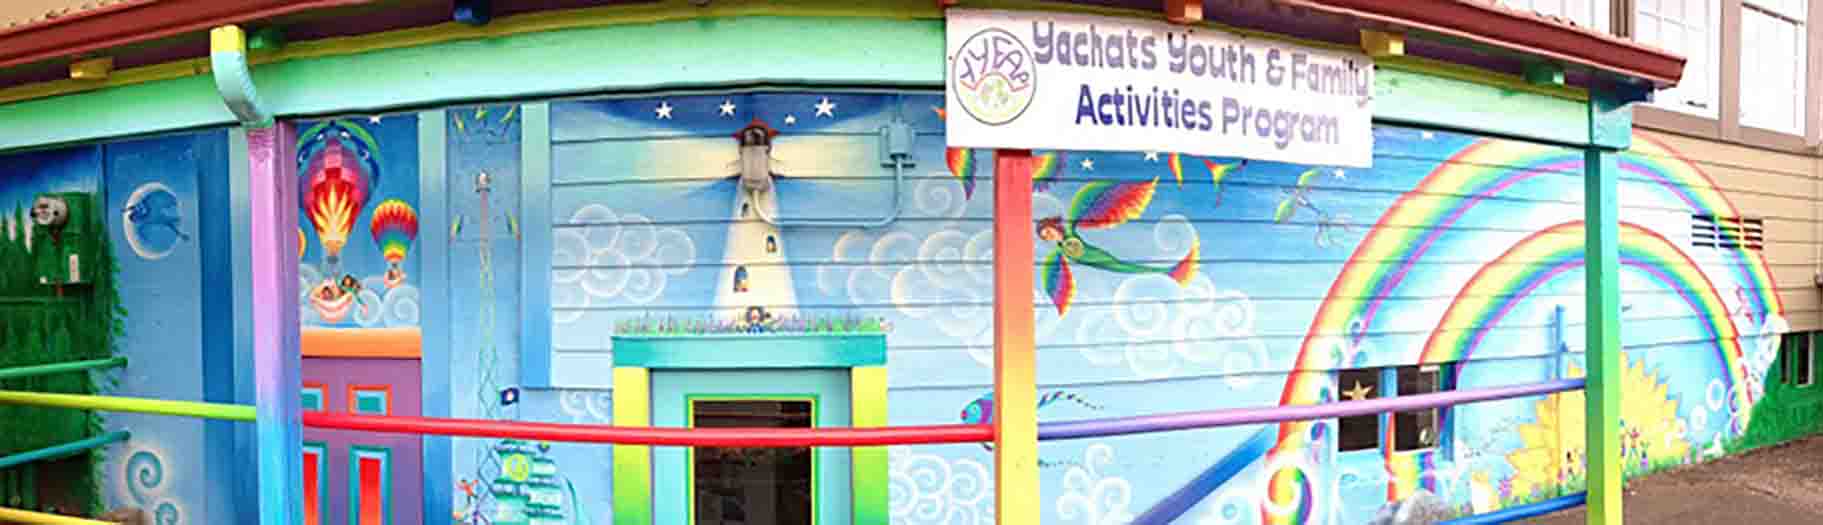 Yachats Youth and Family Activities Program (YYFAP)